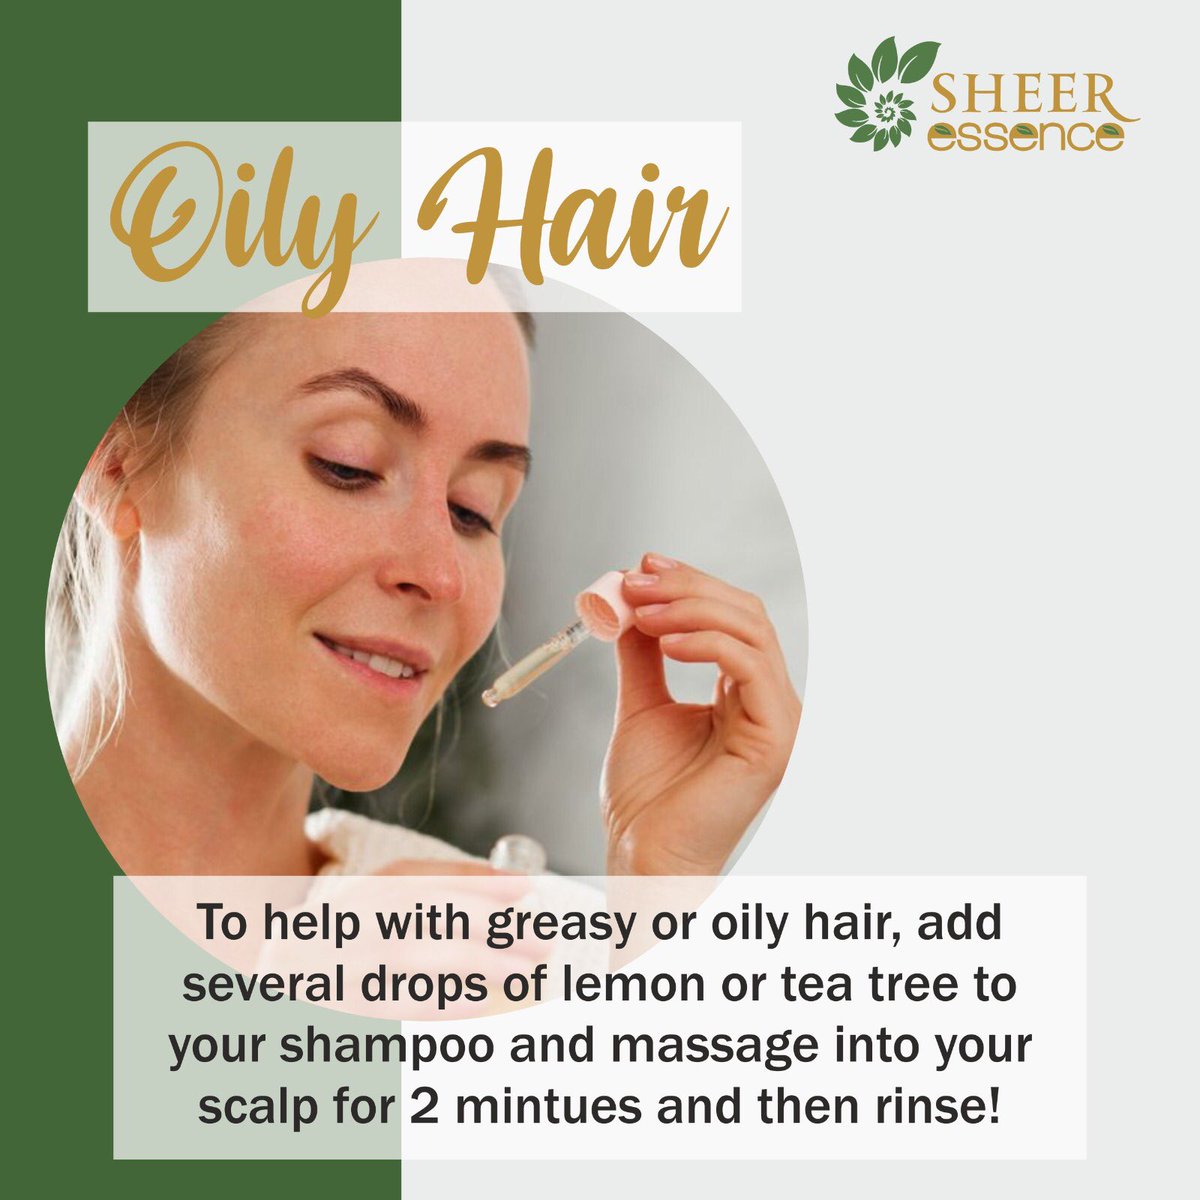 From boosting #hairgrowth to treating an #oilyscalp adding few drops of lemon or tea tree essential oil that'll work for all your hair concerns.
#beautytips #essentialoils #lemonoil #teatreeoil #sheeressence